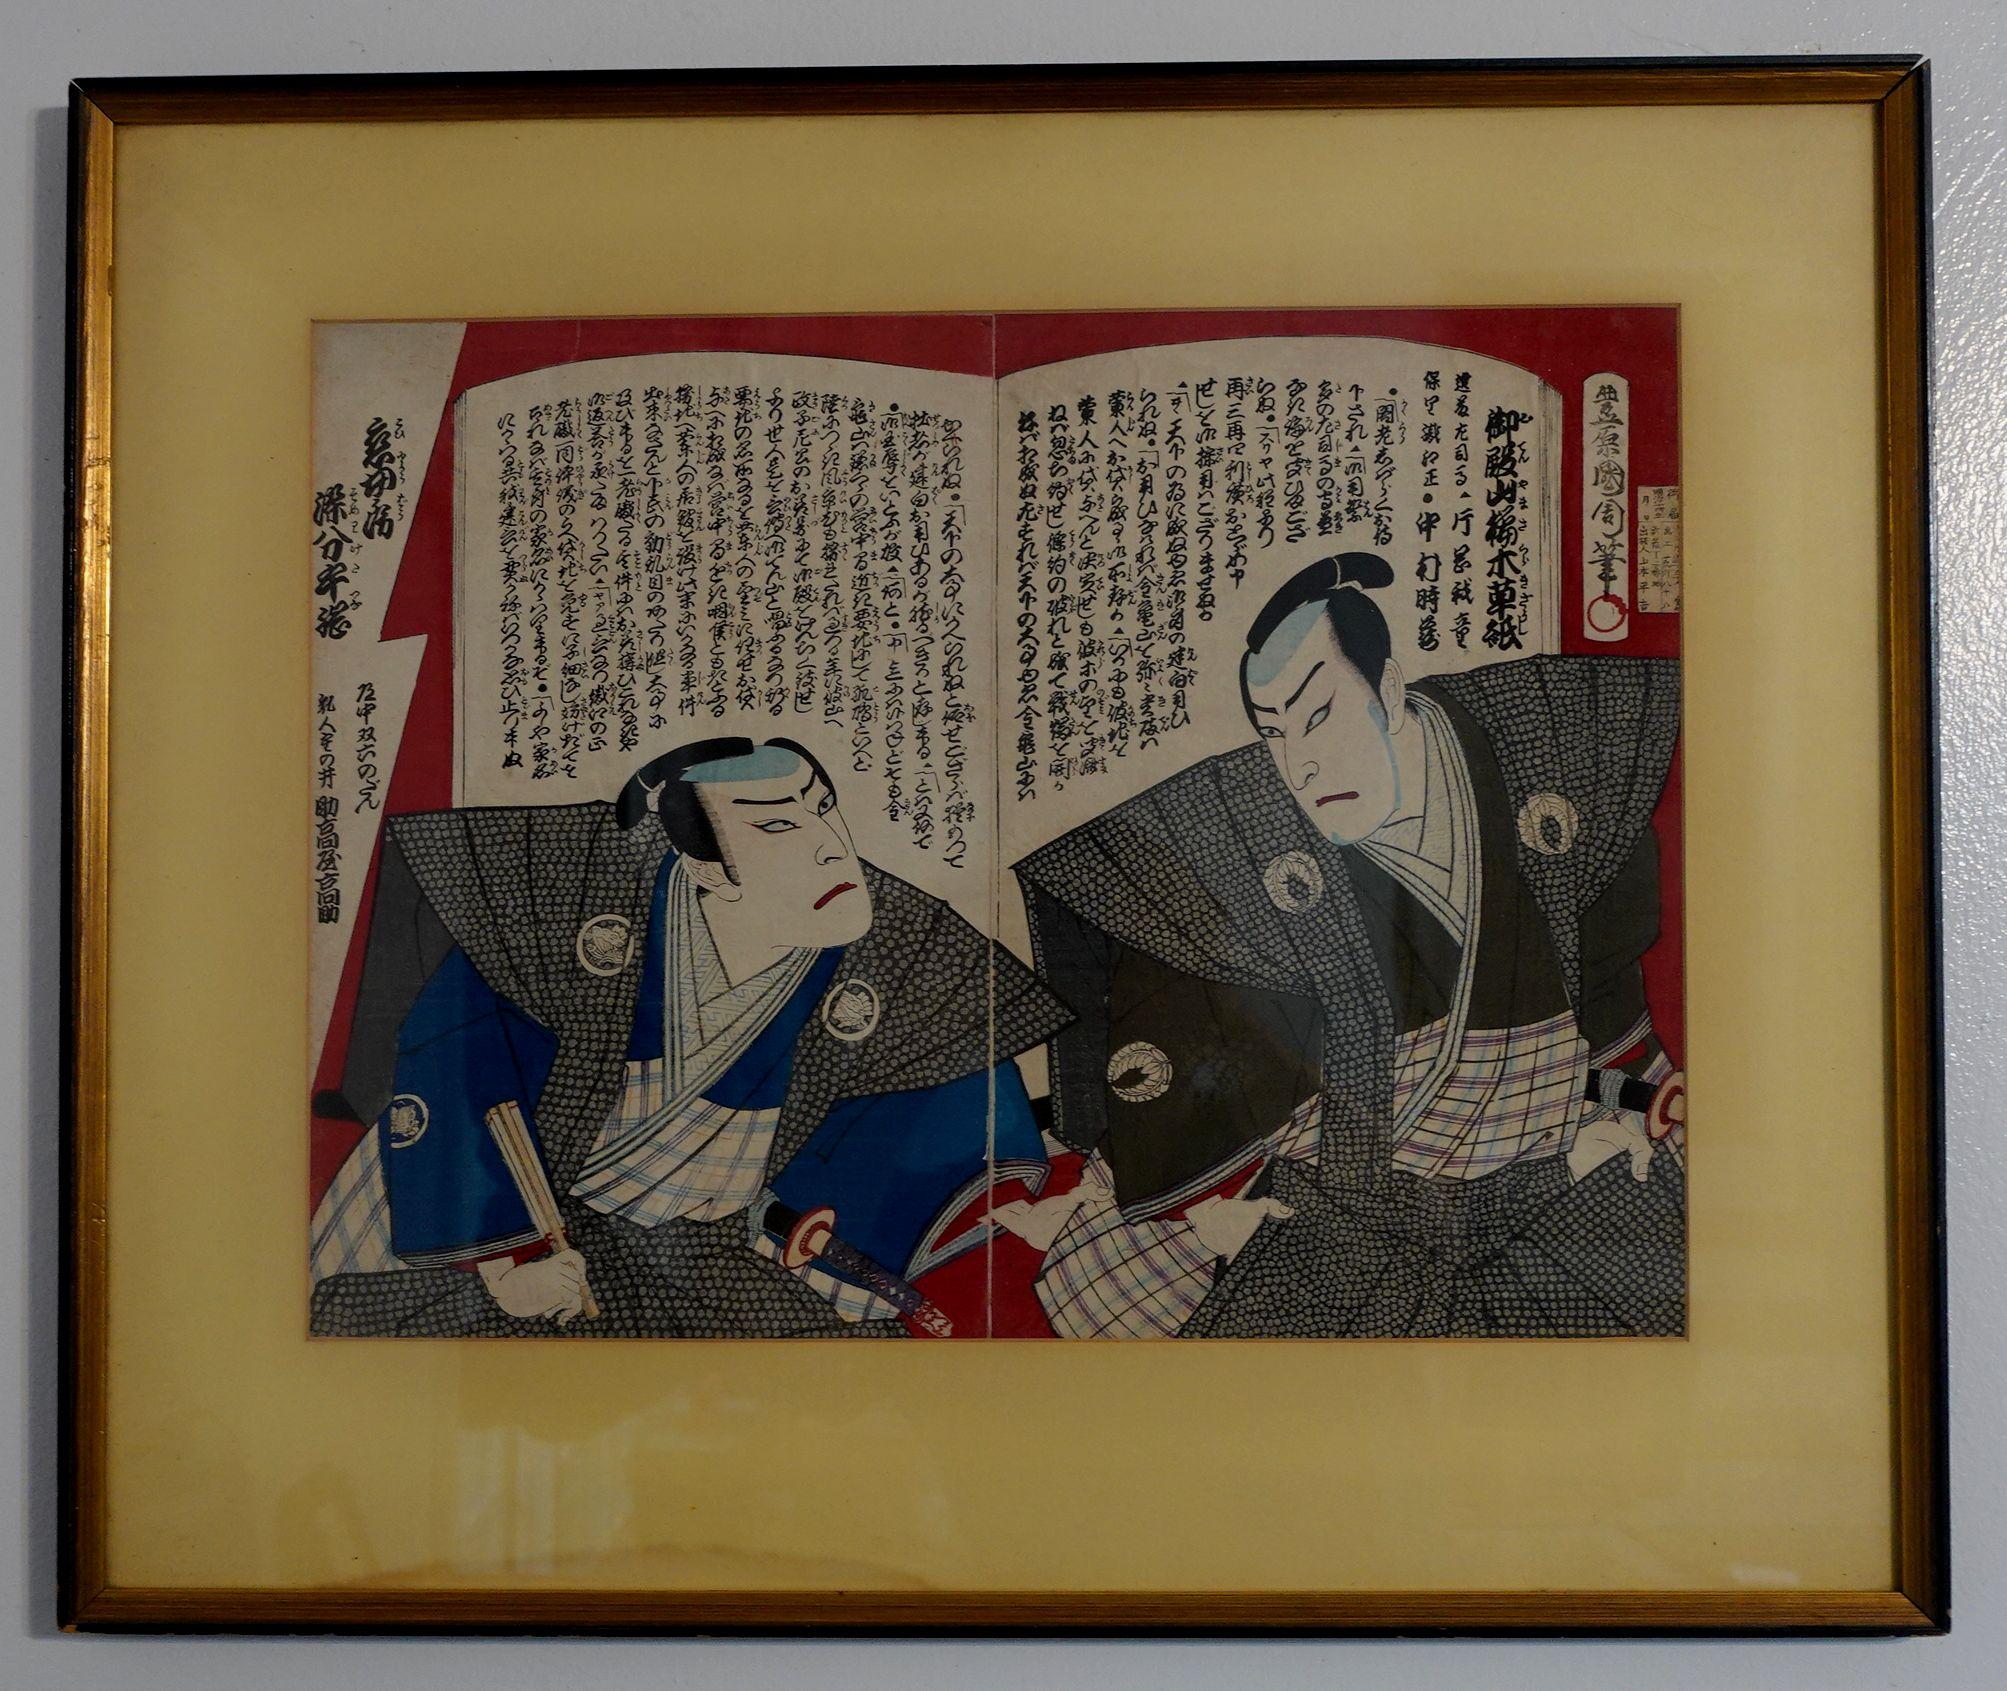 Japanese Diptych Woodblock by Toyohara Kunichika  (1835-1900) 豐原國周
published in 1881 by Yamamoto Heikichi

Dimension: with frame, 24.75